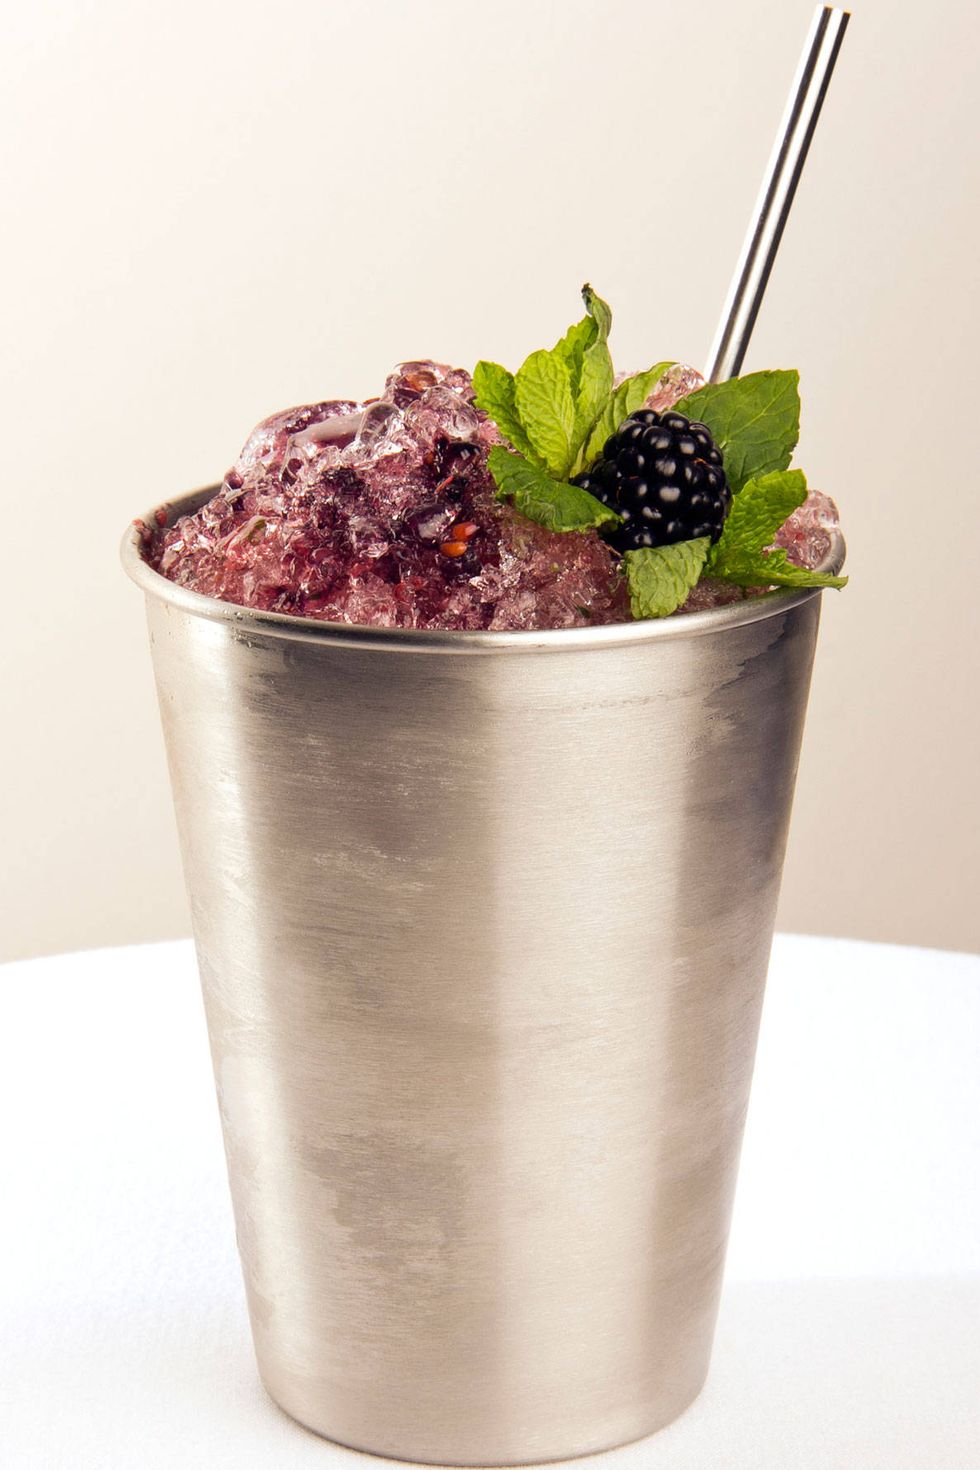 Juleps may be most closely associated with the Kentucky Derby and as much as we love the traditional mint version (check out our guide to the Ultimate Mint Julep here), in the summer it's fun to try it with fruit added to the mix. Bay Kitchen Bar, in East Hampton, NY, serves a blackberry mint julep that sounds delicious. "We make it with fresh, local blackberries and mint that showcases the flavors of Long Island while perfectly complimenting our menu," says Adam Miller, managing partner and beverage program director.Ingredients2 oz Bulleit Bourbon1/2 oz Chambord3/4 oz Fresh lime juice1/2 oz Demerara syrup5 muddled blackberries6 mint leavesInstructionsMix all ingredients in a shaker and pour over crushed ice. Garnish with a sprig of mint and a blackberry.